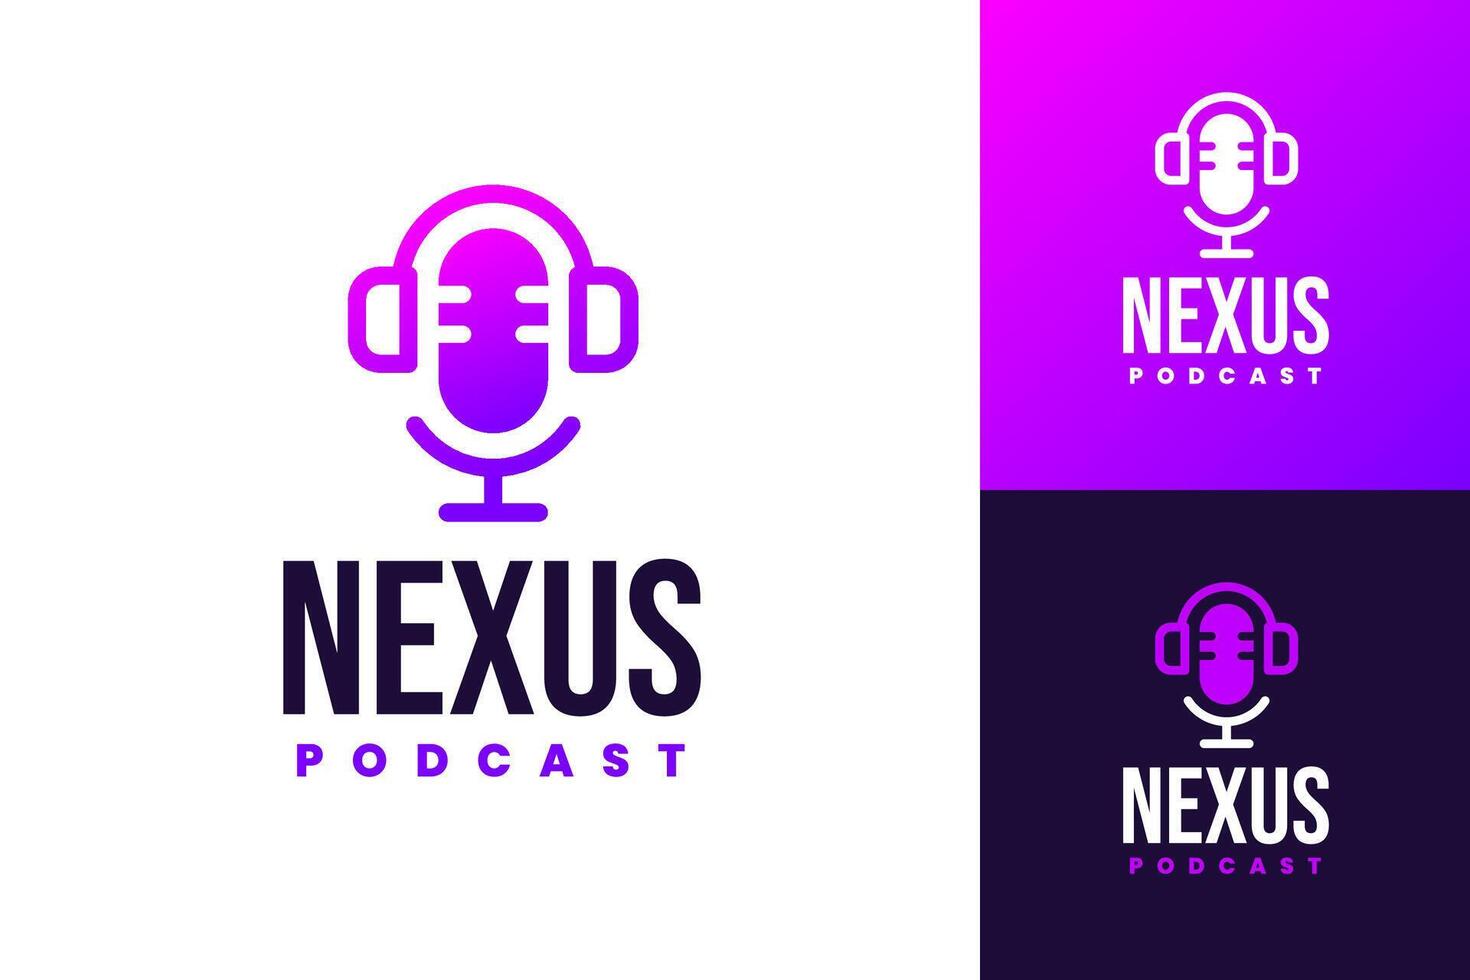 Podcast Logo Vector Icon in modern and minimalist style